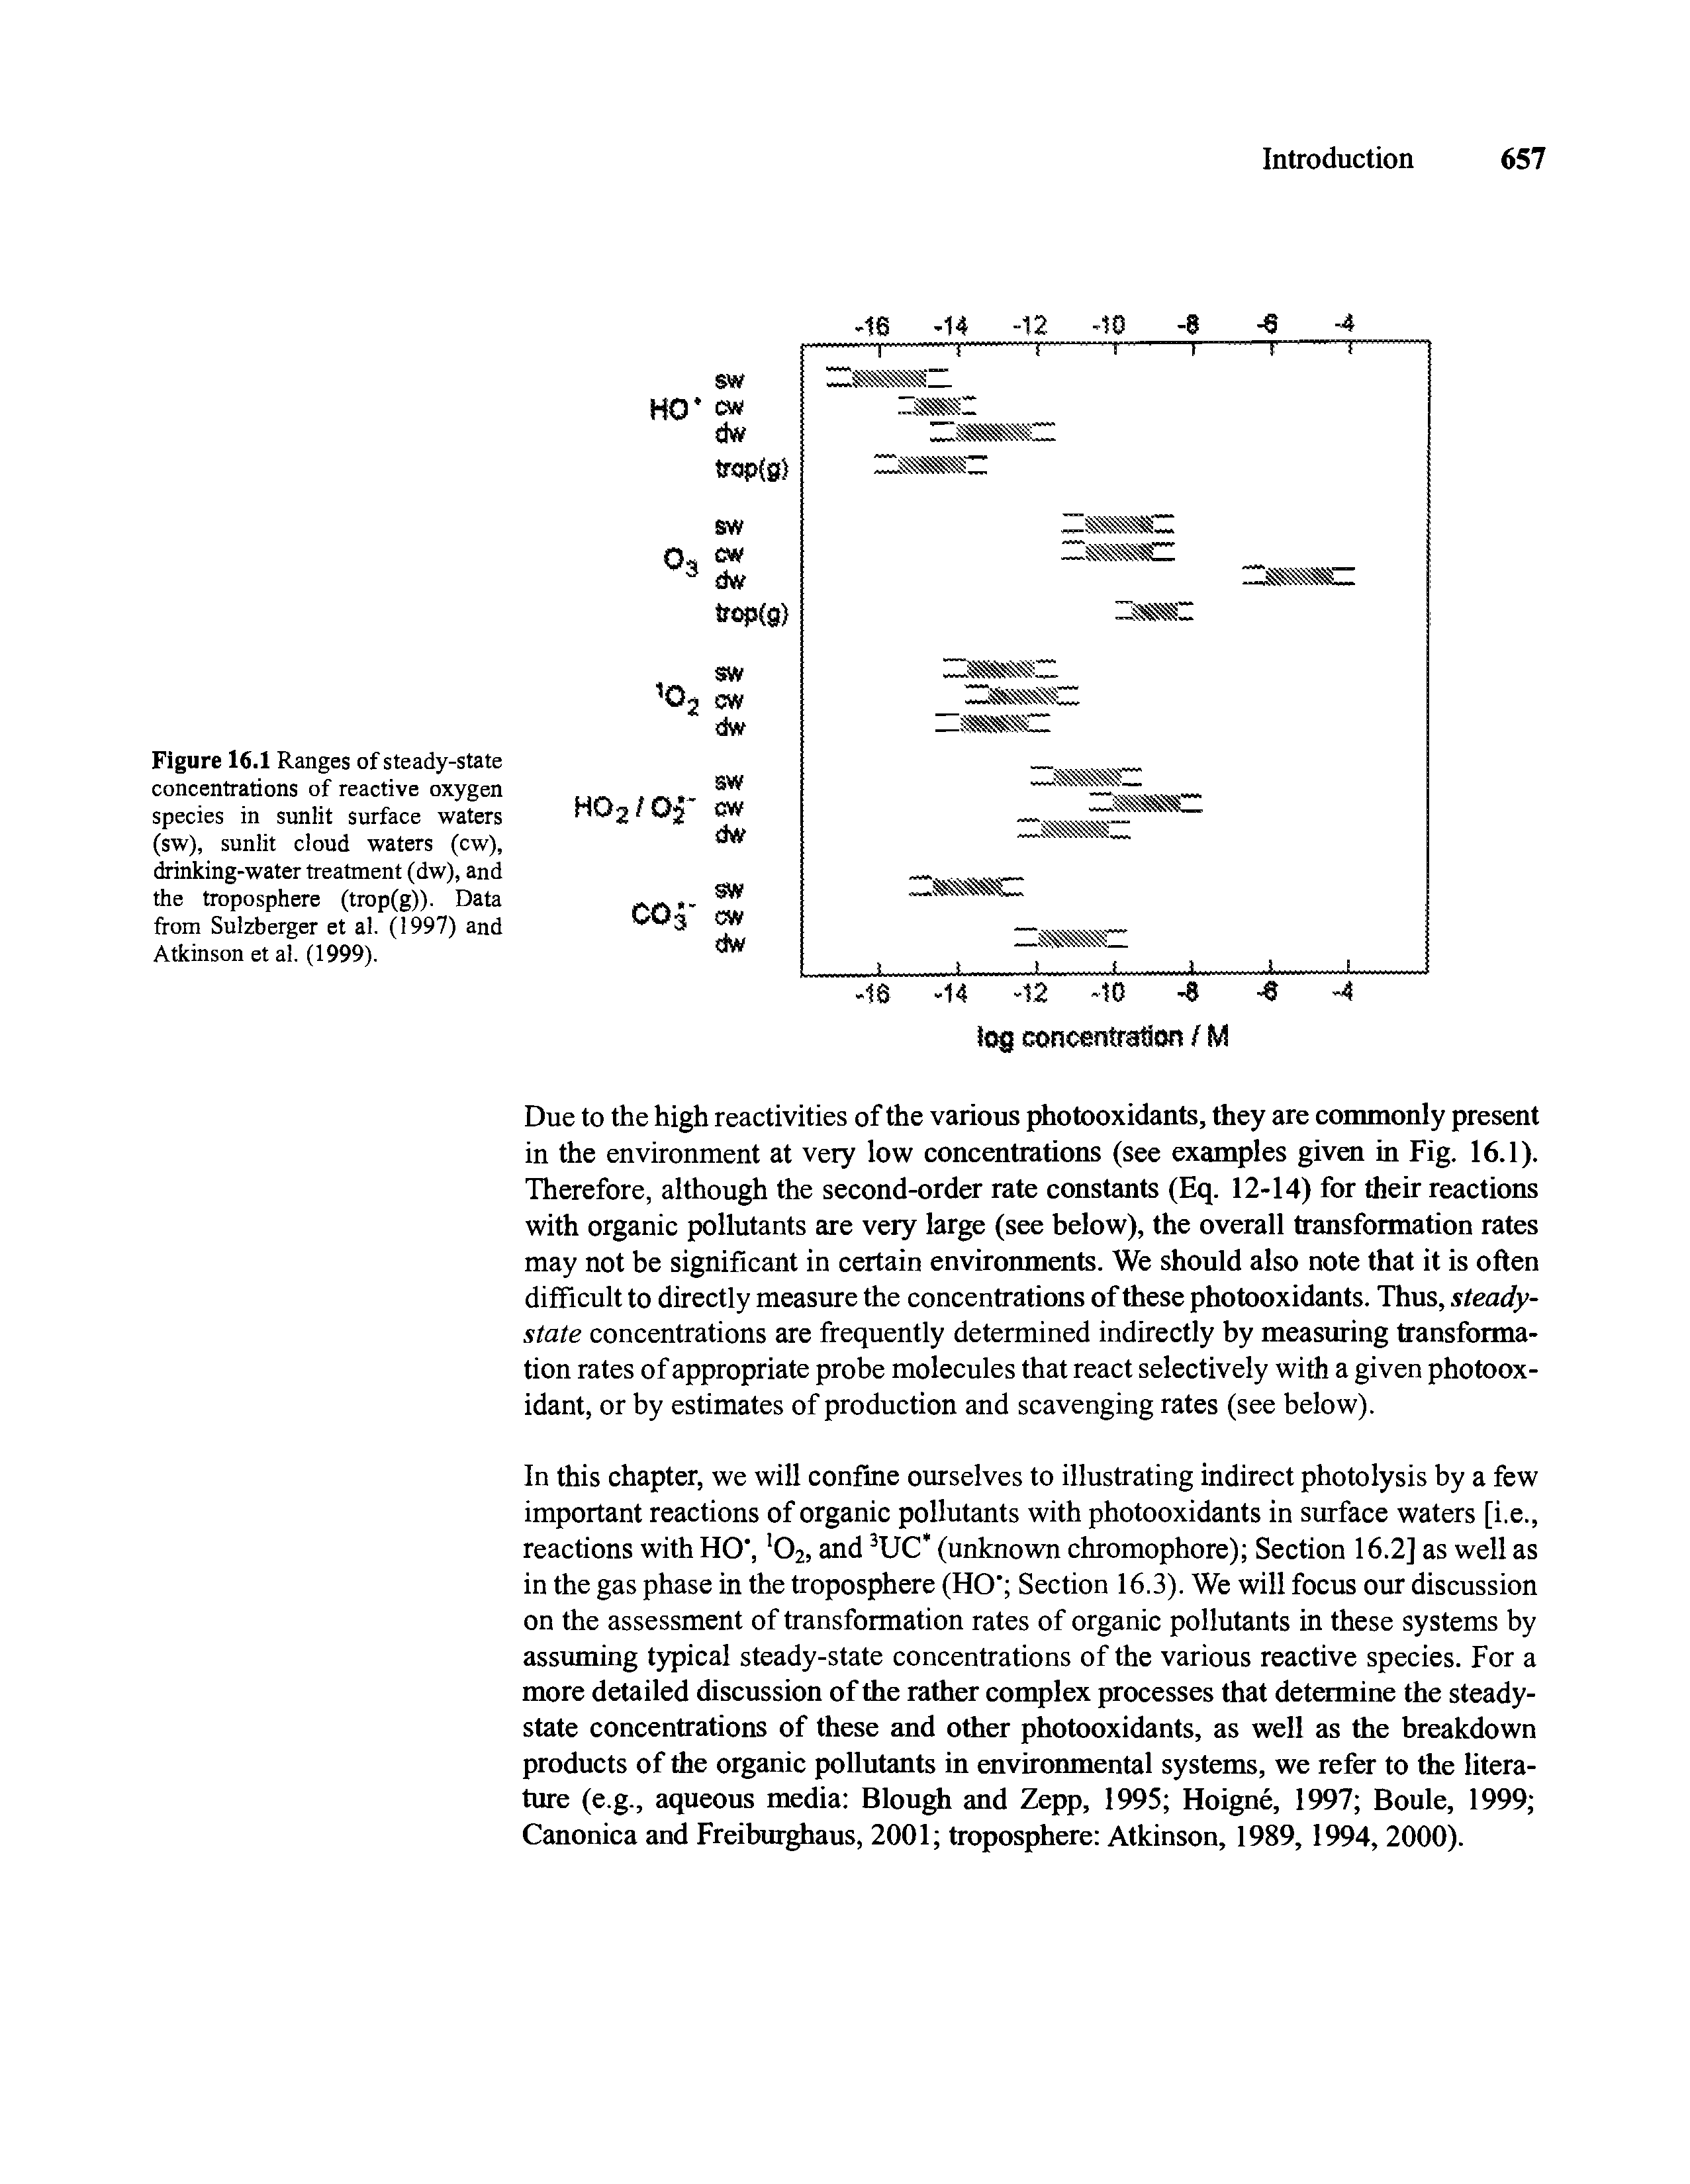 Figure 16.1 Ranges of steady-state concentrations of reactive oxygen species in sunlit surface waters (sw), sunlit cloud waters (cw), drinking-water treatment (dw), and the troposphere (trop(g)). Data from Sulzberger et al. (1997) and Atkinson et al. (1999).